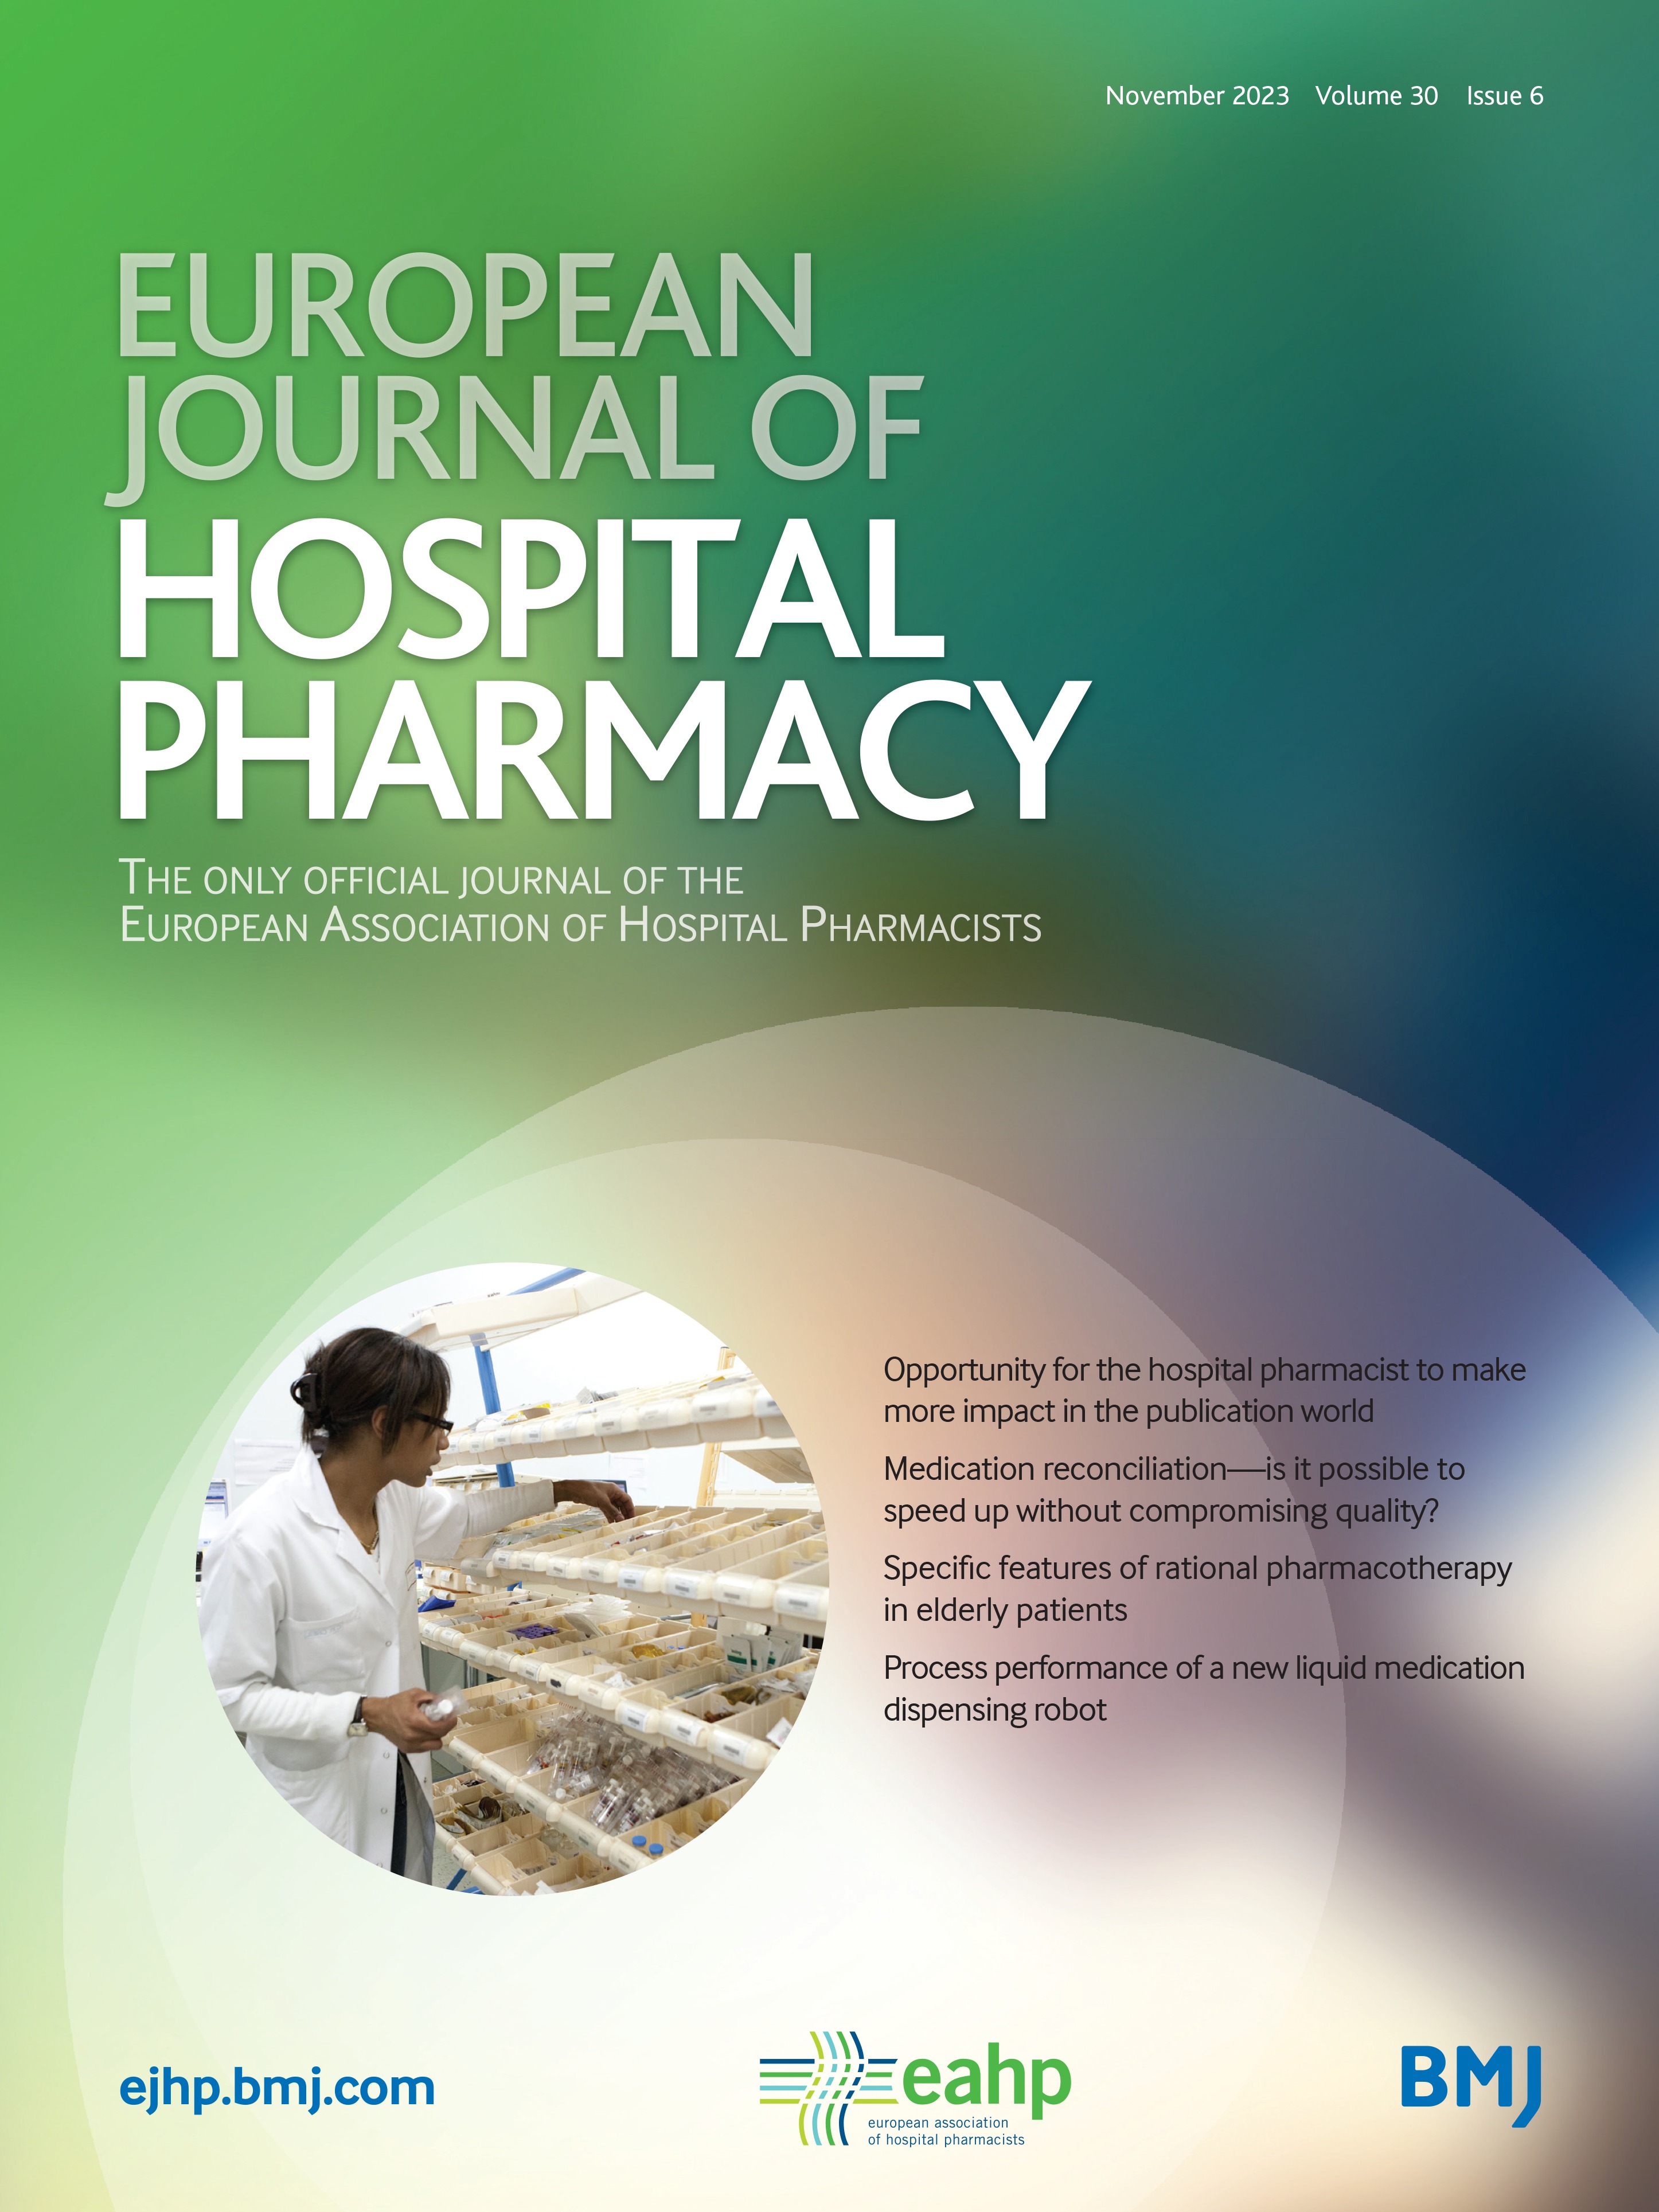 Medication reconciliation--is it possible to speed up without compromising quality? A before-after study in the emergency department